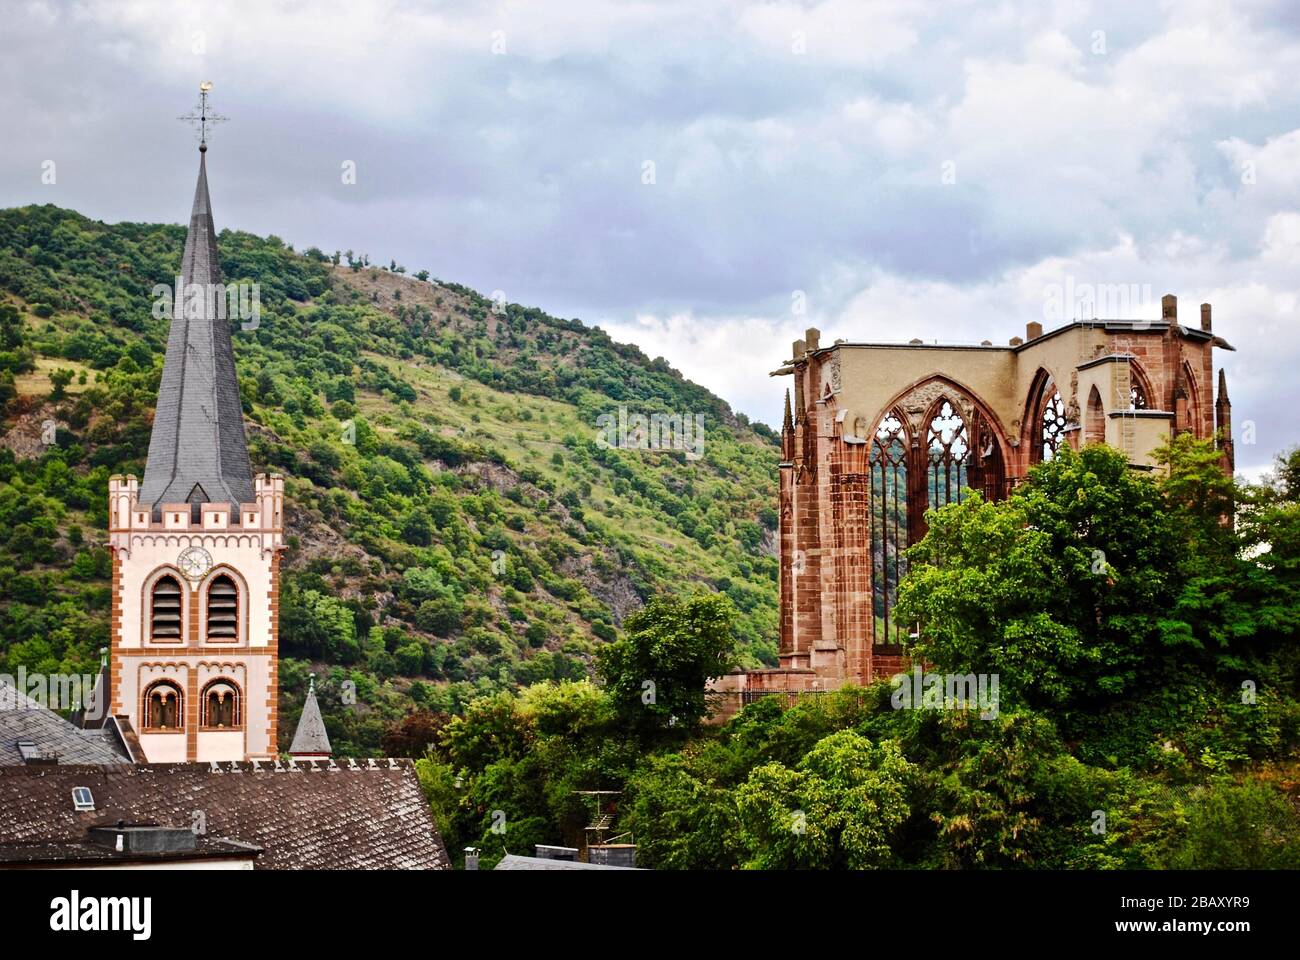 St Peters Church and ruin of the gothic Wernerkapelle along the Rhein (Rhine) River in Bacharach, Rhineland-Palatinate, Germany. Stock Photo